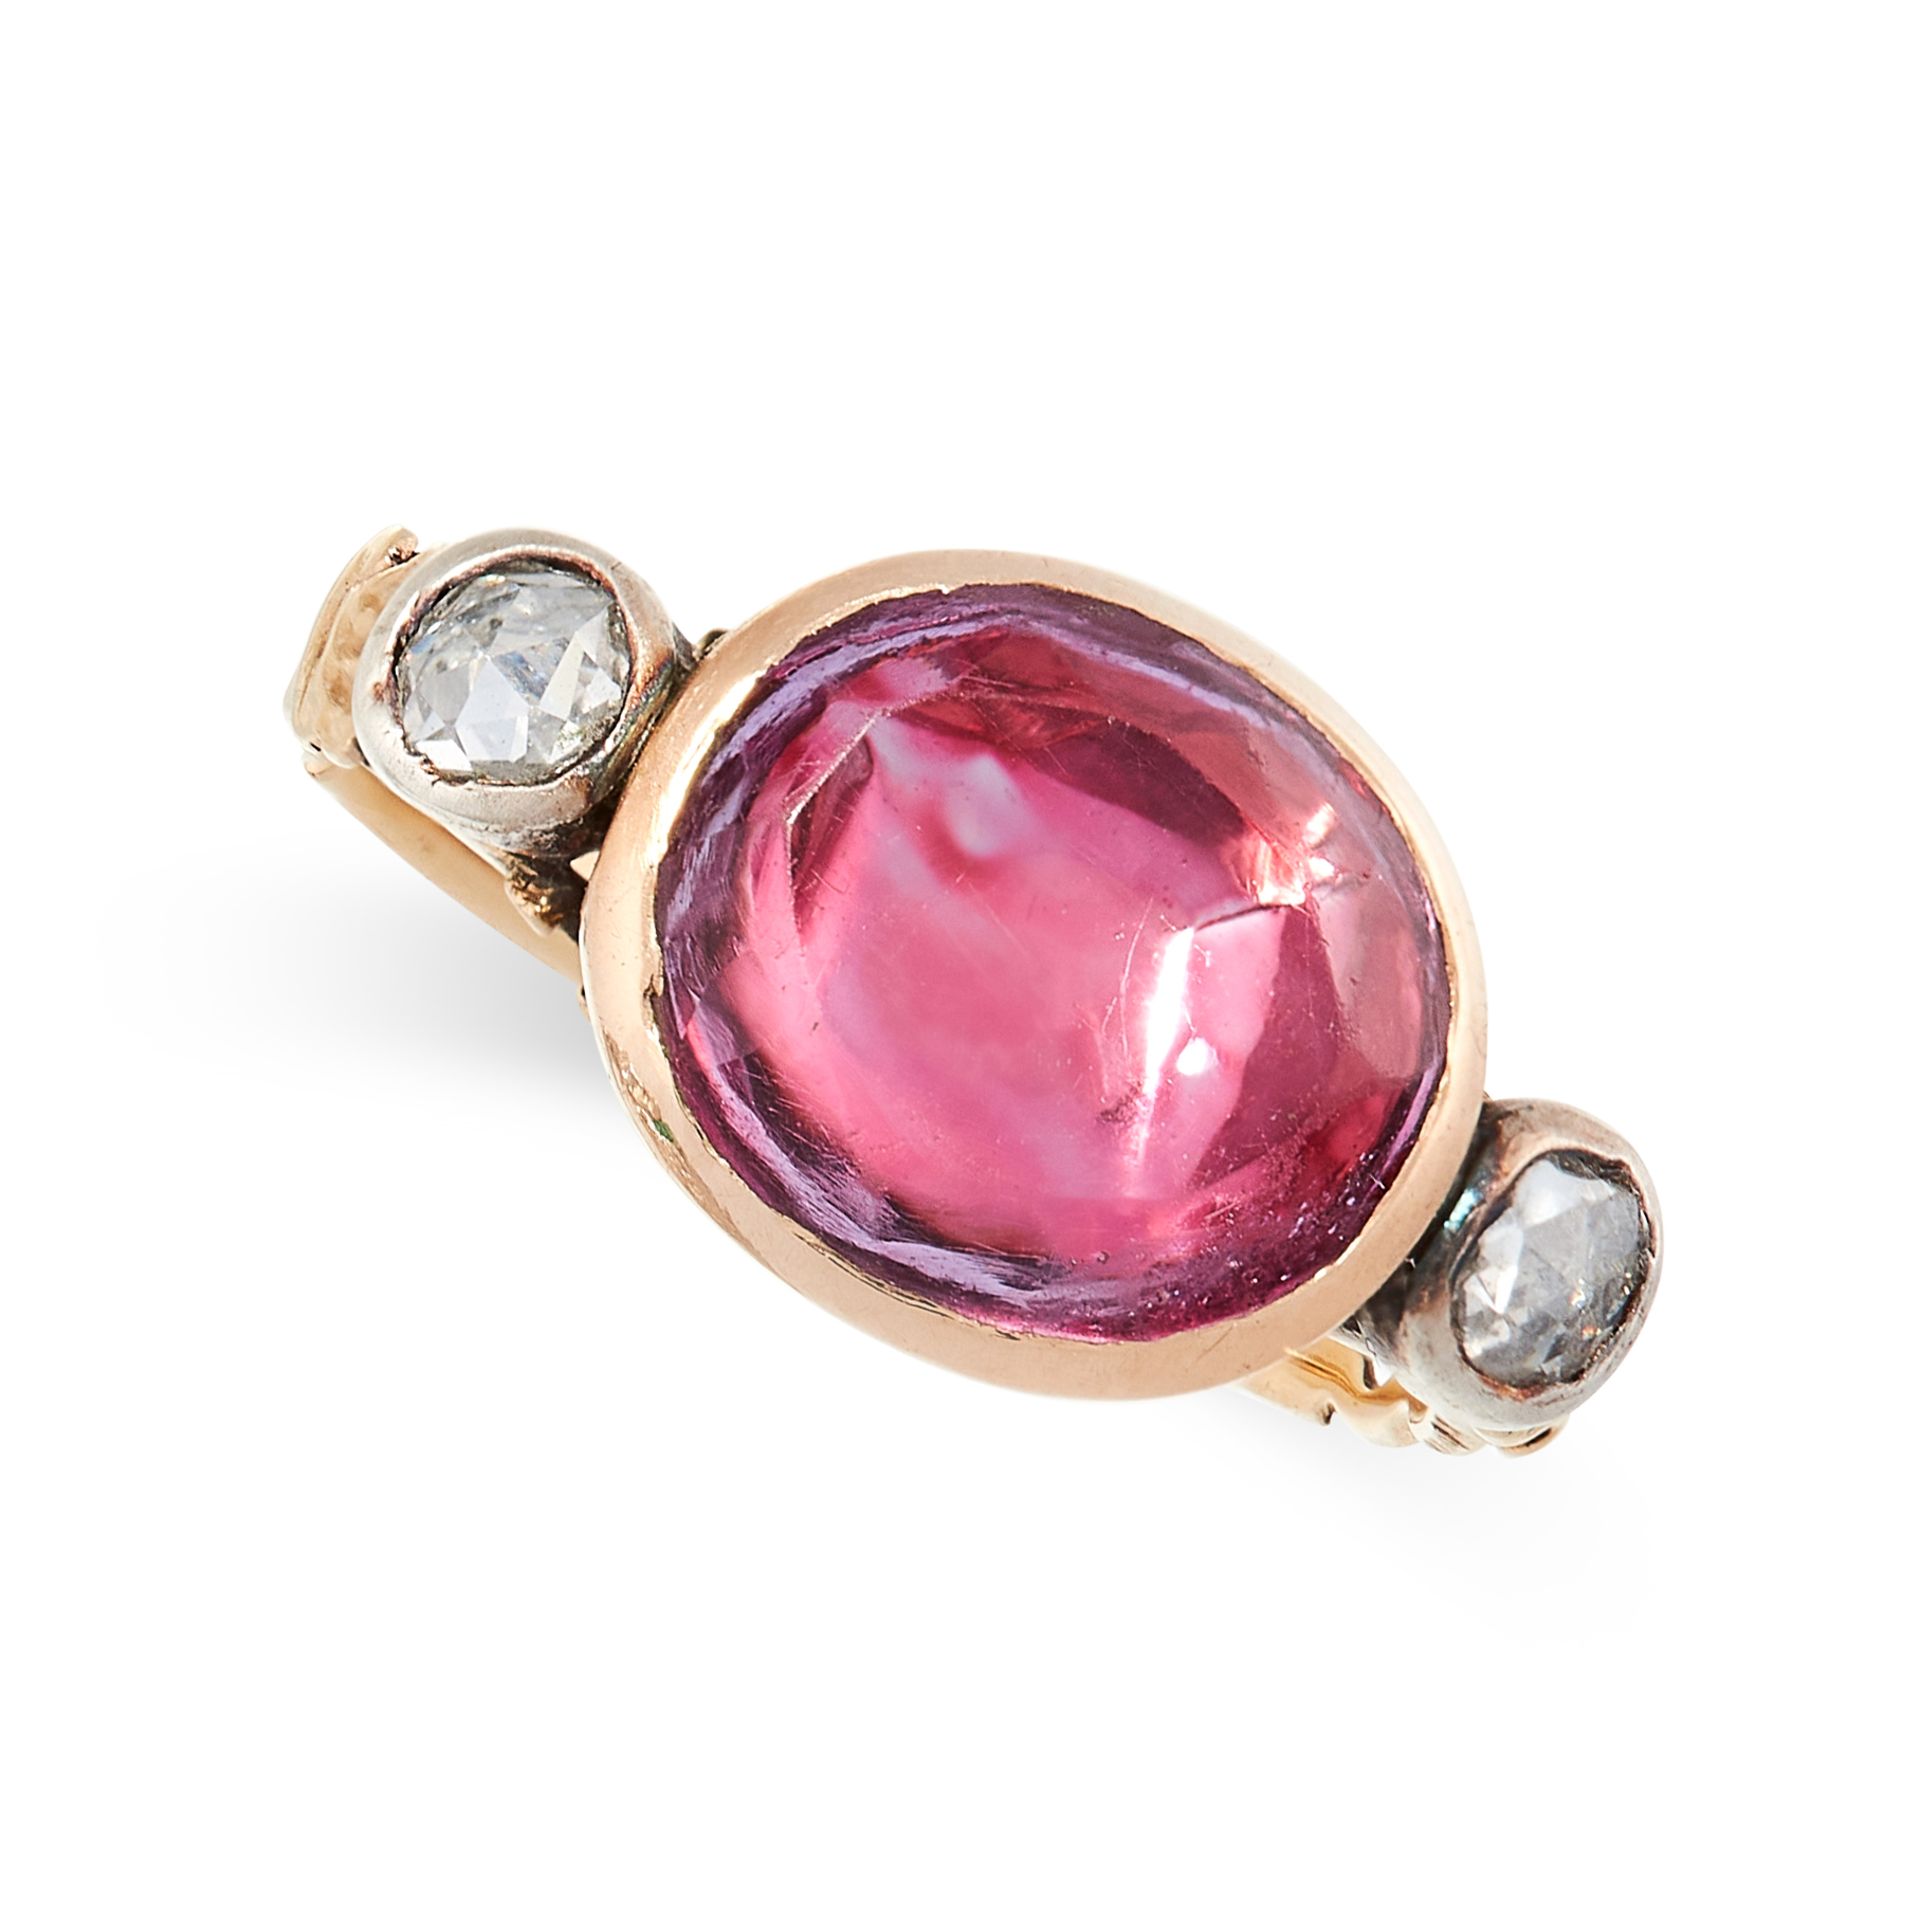 AN ANTIQUE PASTE AND DIAMOND RING, EARLY 19TH CENTURY in yellow gold, set with a foiled back pink